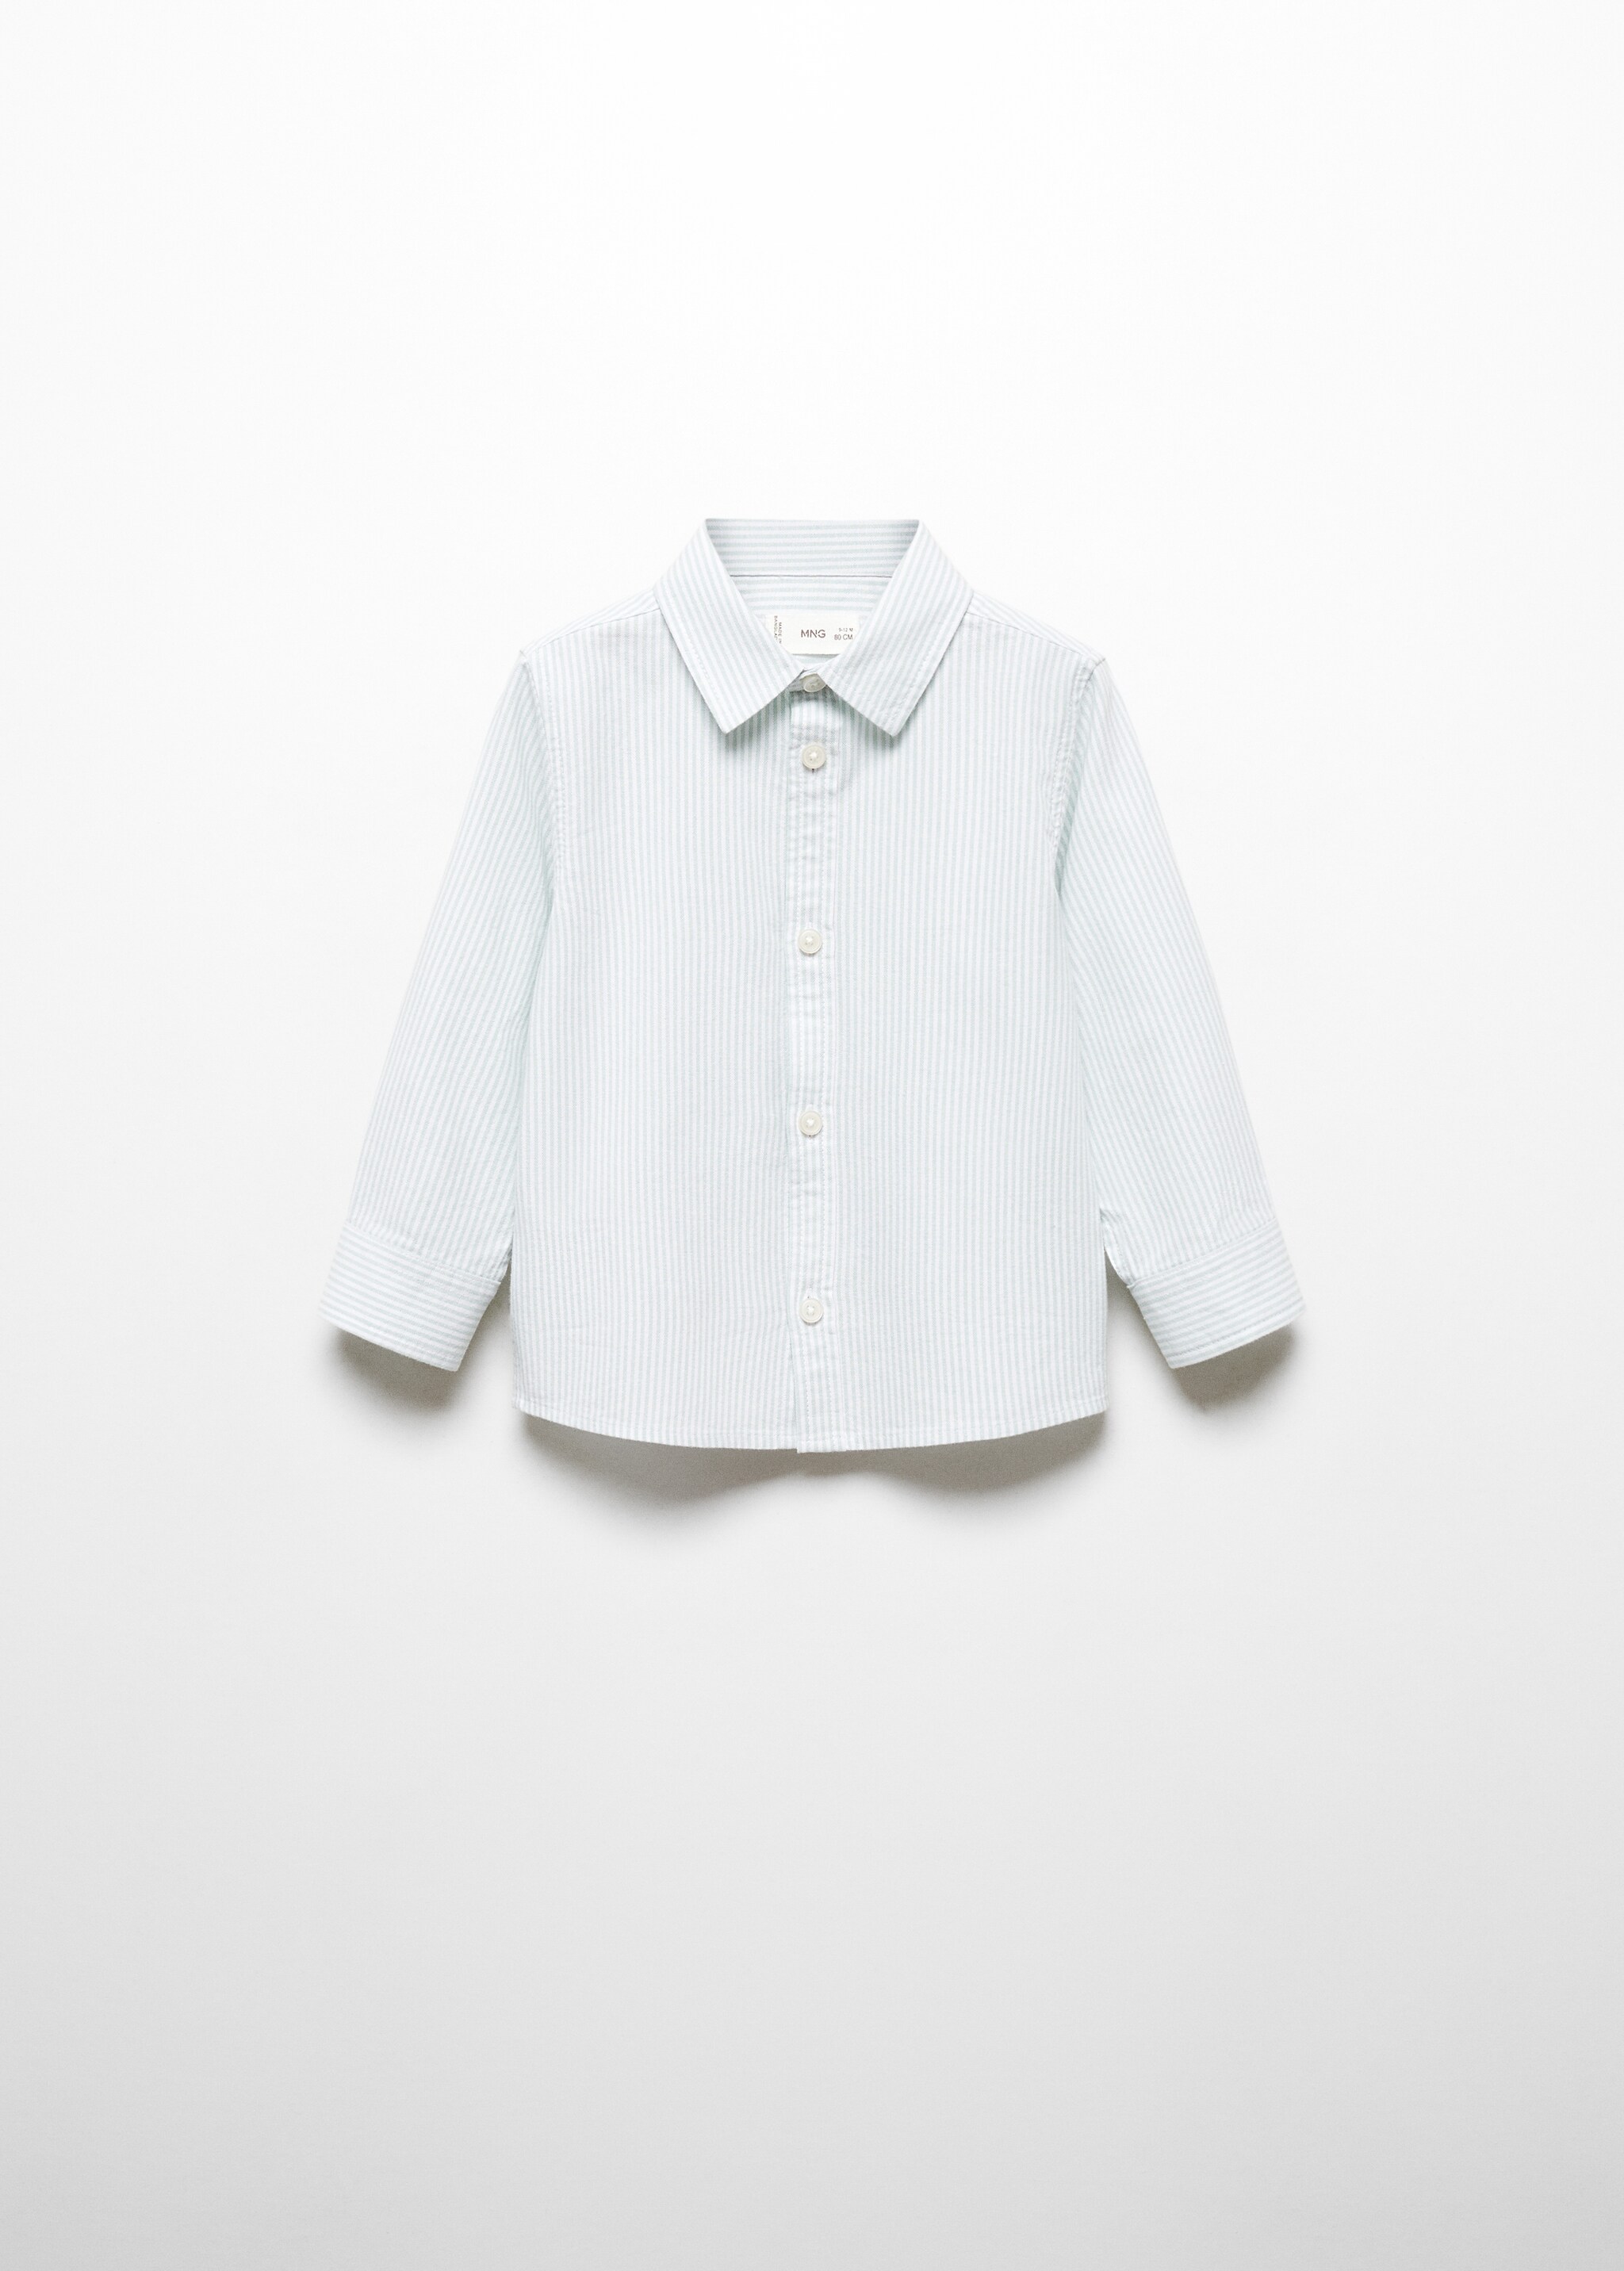 Oxford cotton shirt - Article without model